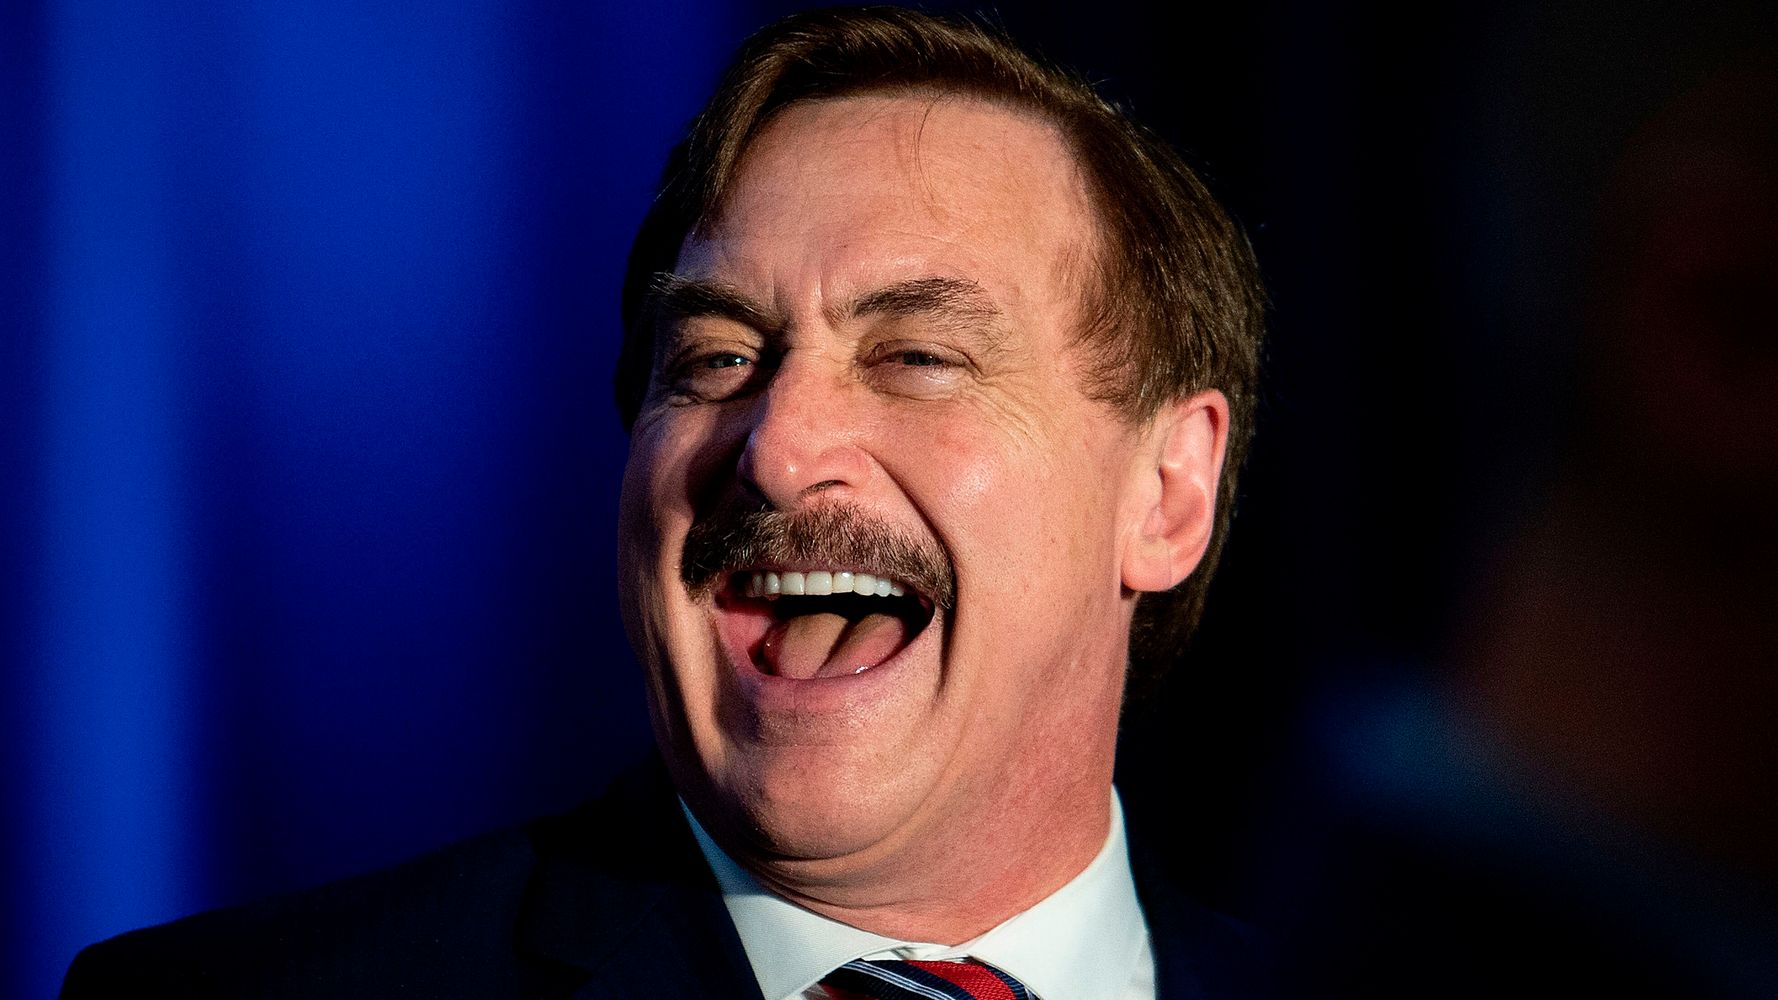 Mike Lindell's War With Fox News Heats Up With Attack On Hannity, Ingraham